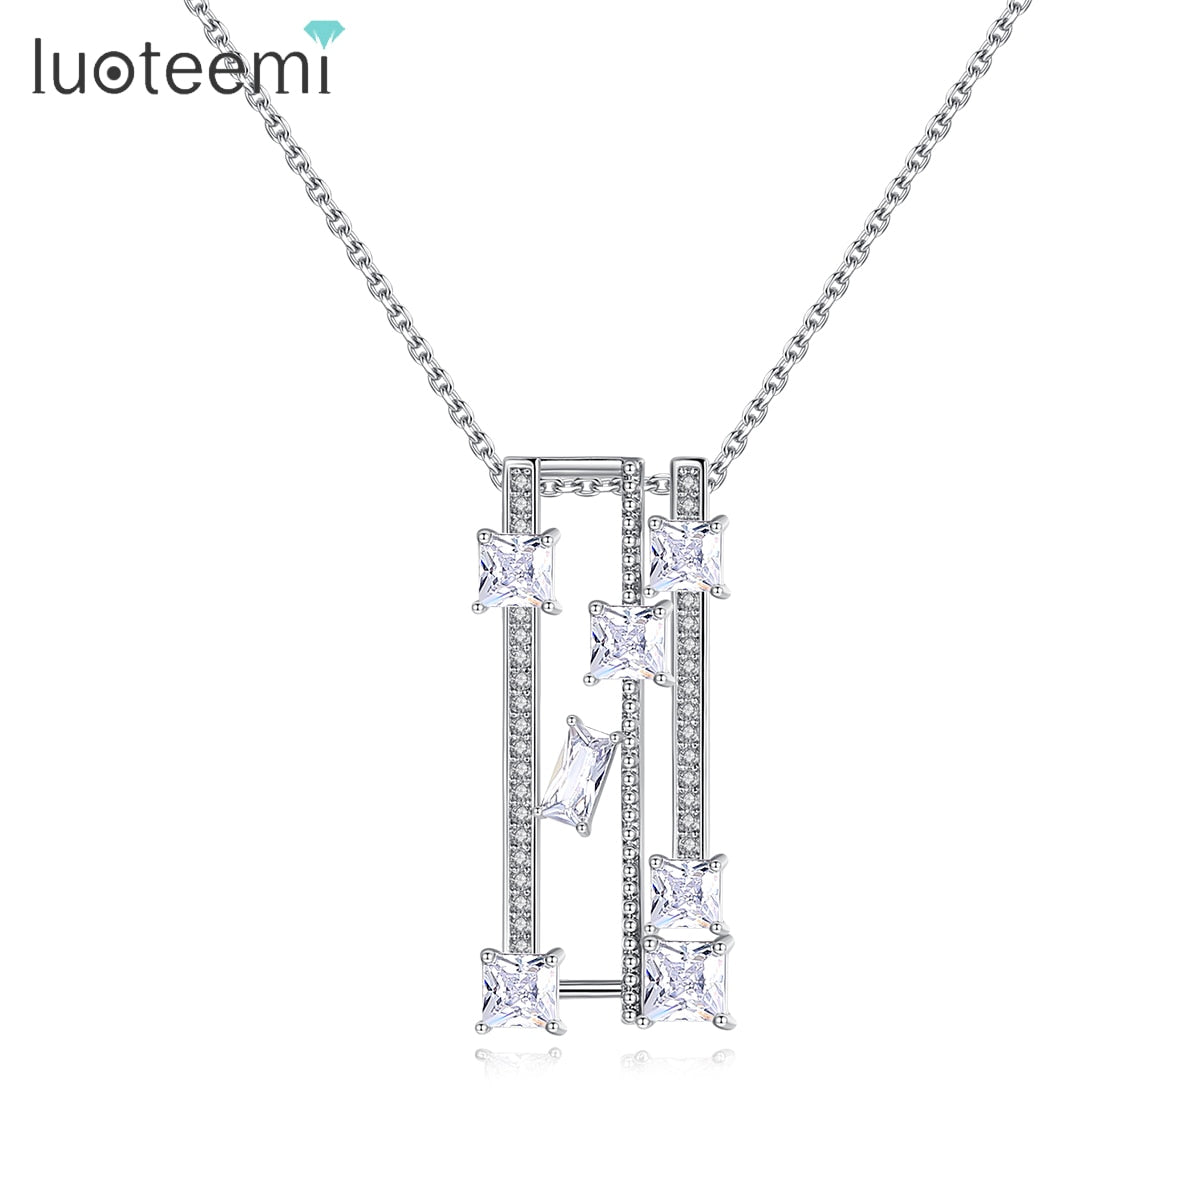 LUOTEEMI New Sparkling Square Clear Cubic Zirconia Pendant Necklaces for Women AAA Brilliant Fashion Jewelry Friendship Gifts